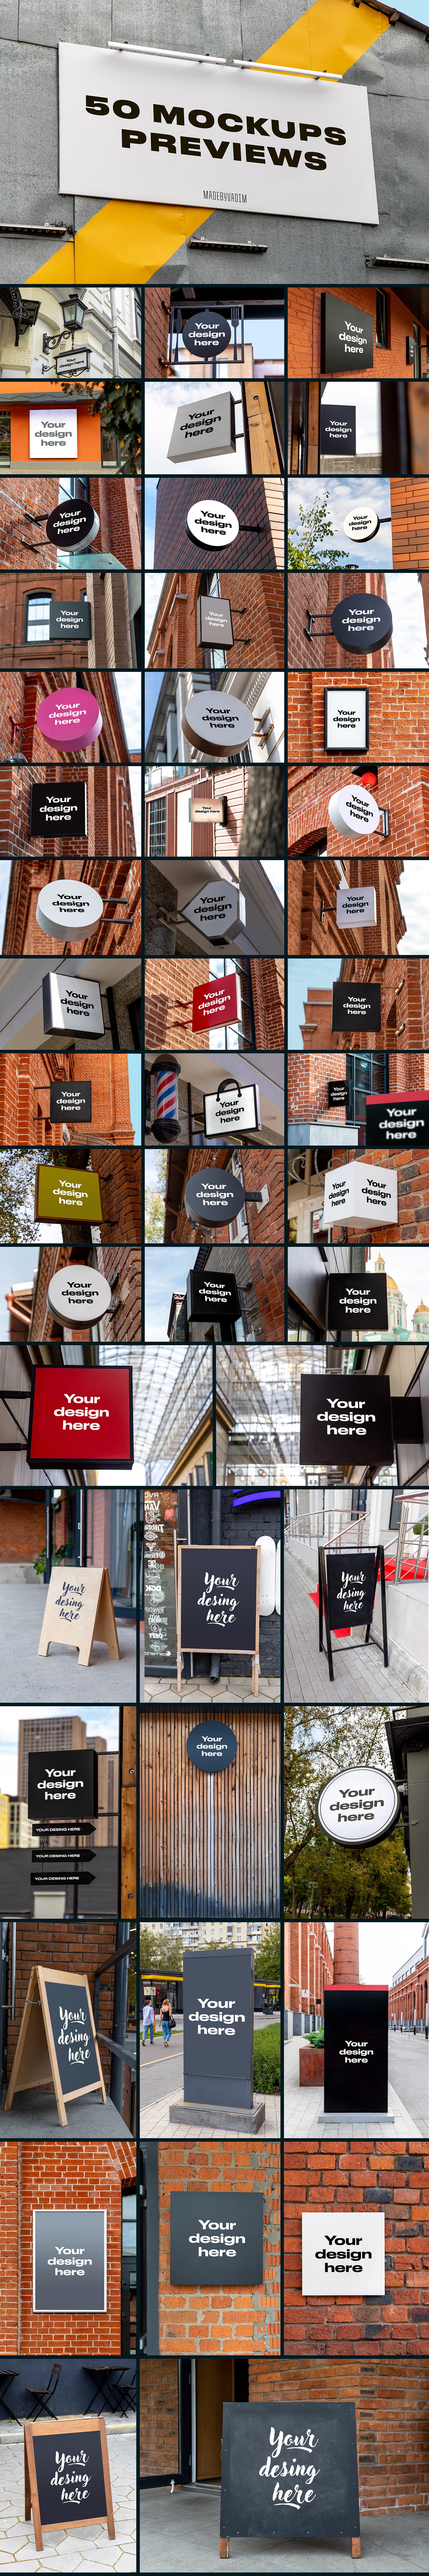 50 Signs and Boards Mockups (Moscow Edition)